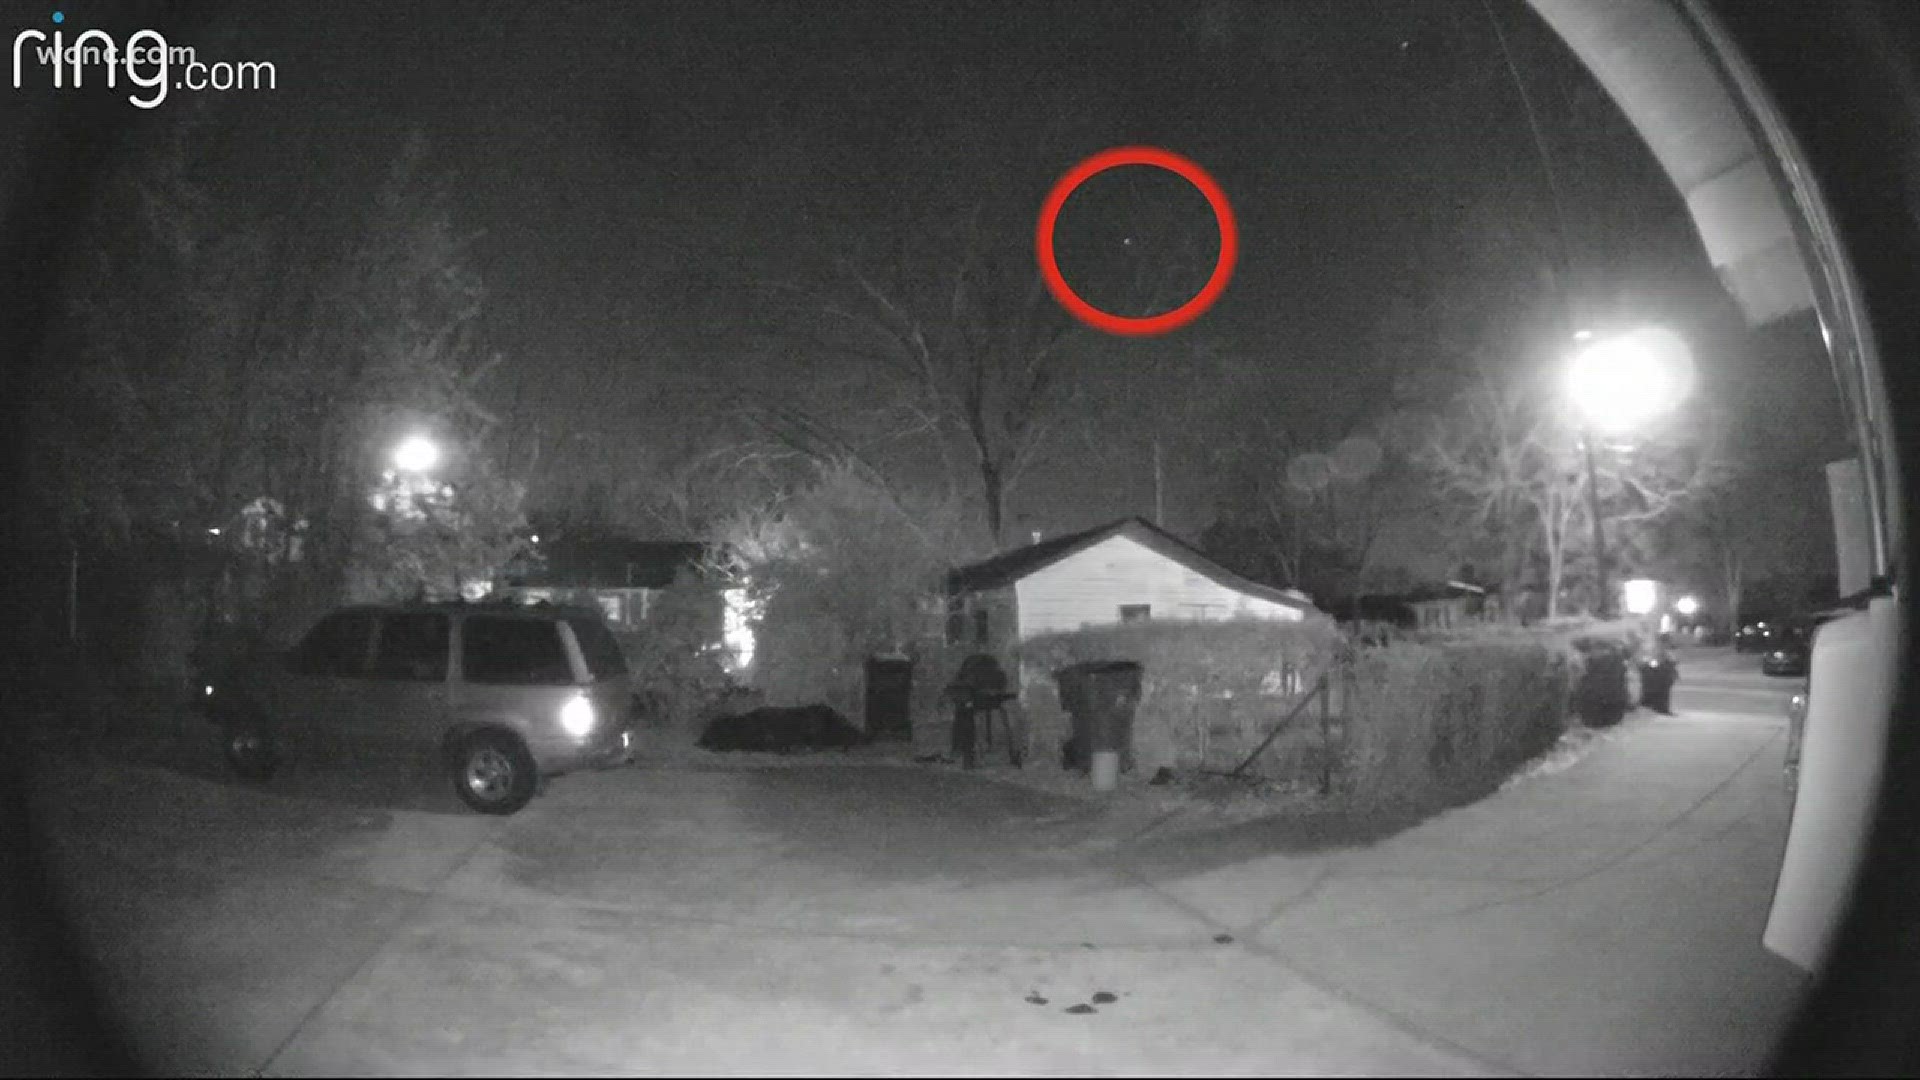 A Charlotte homeowner captured glowing orbs on his surveillance camera. Now, it has the whole neighborhood wondering what they could be.